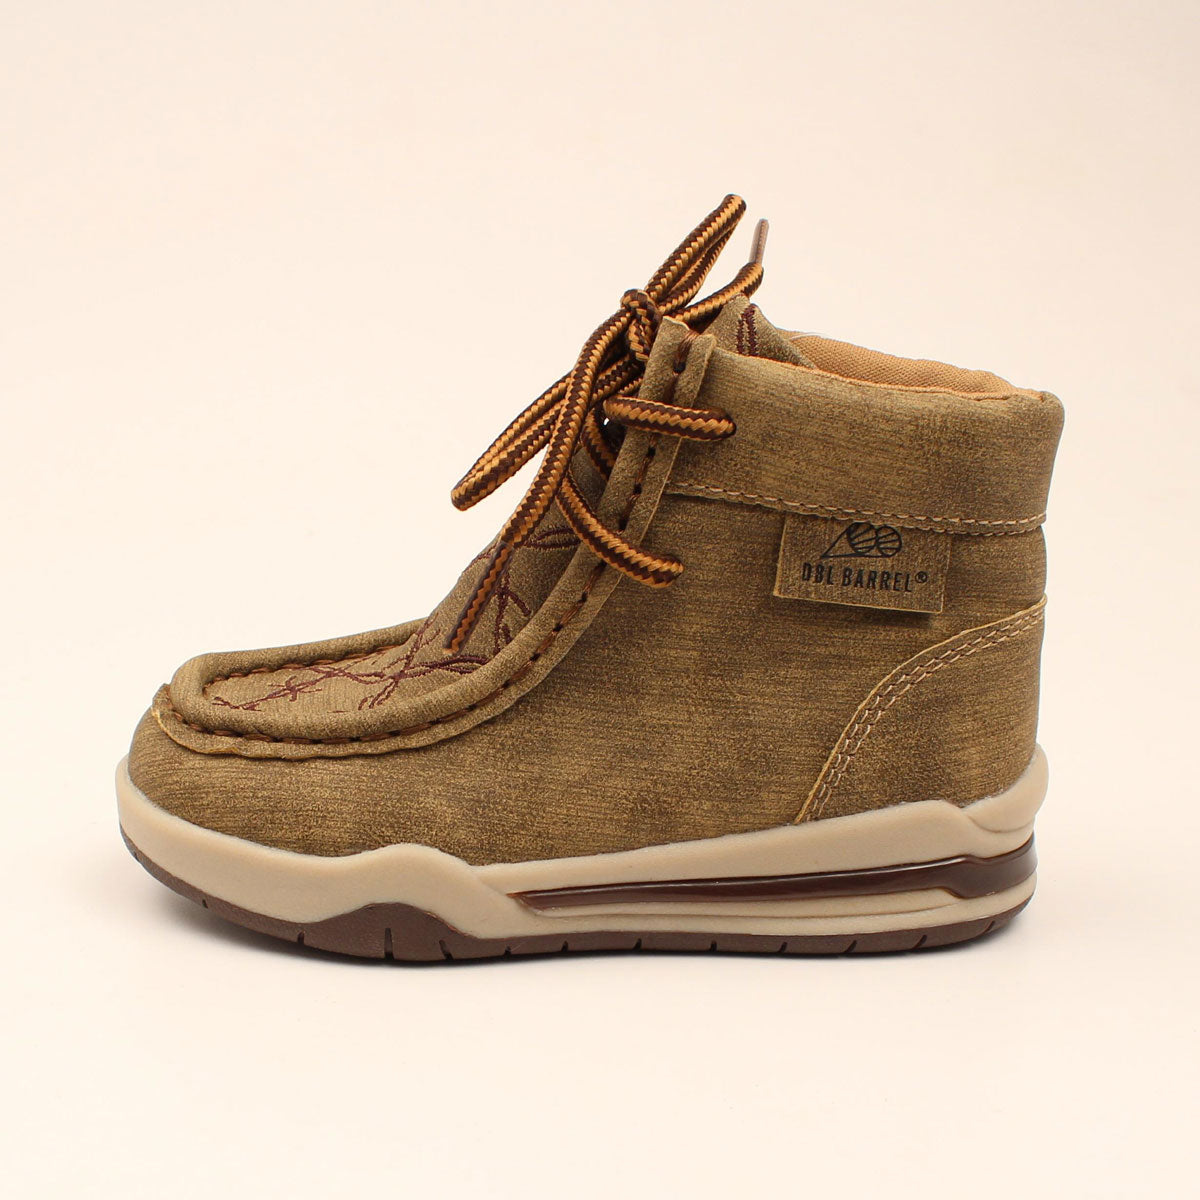 Double Barrel Boys Casual Shoe - Tan with Light Barbwire Stitching on Top